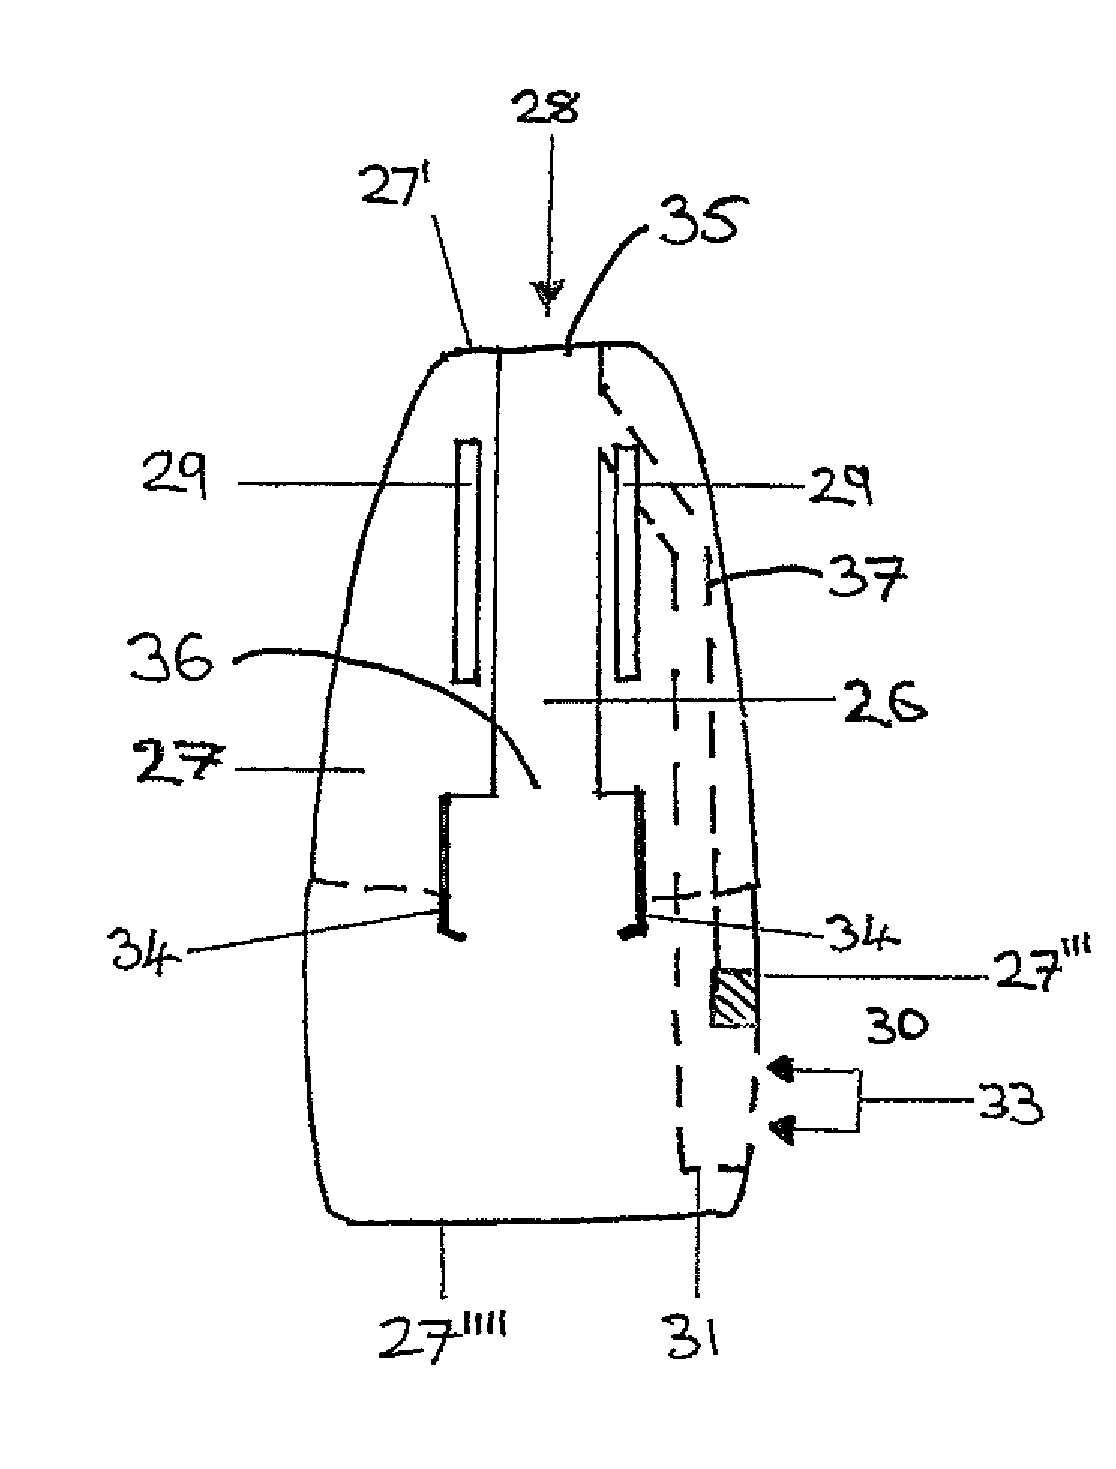 Air treatment agent dispenser with improved odour sensor functionality